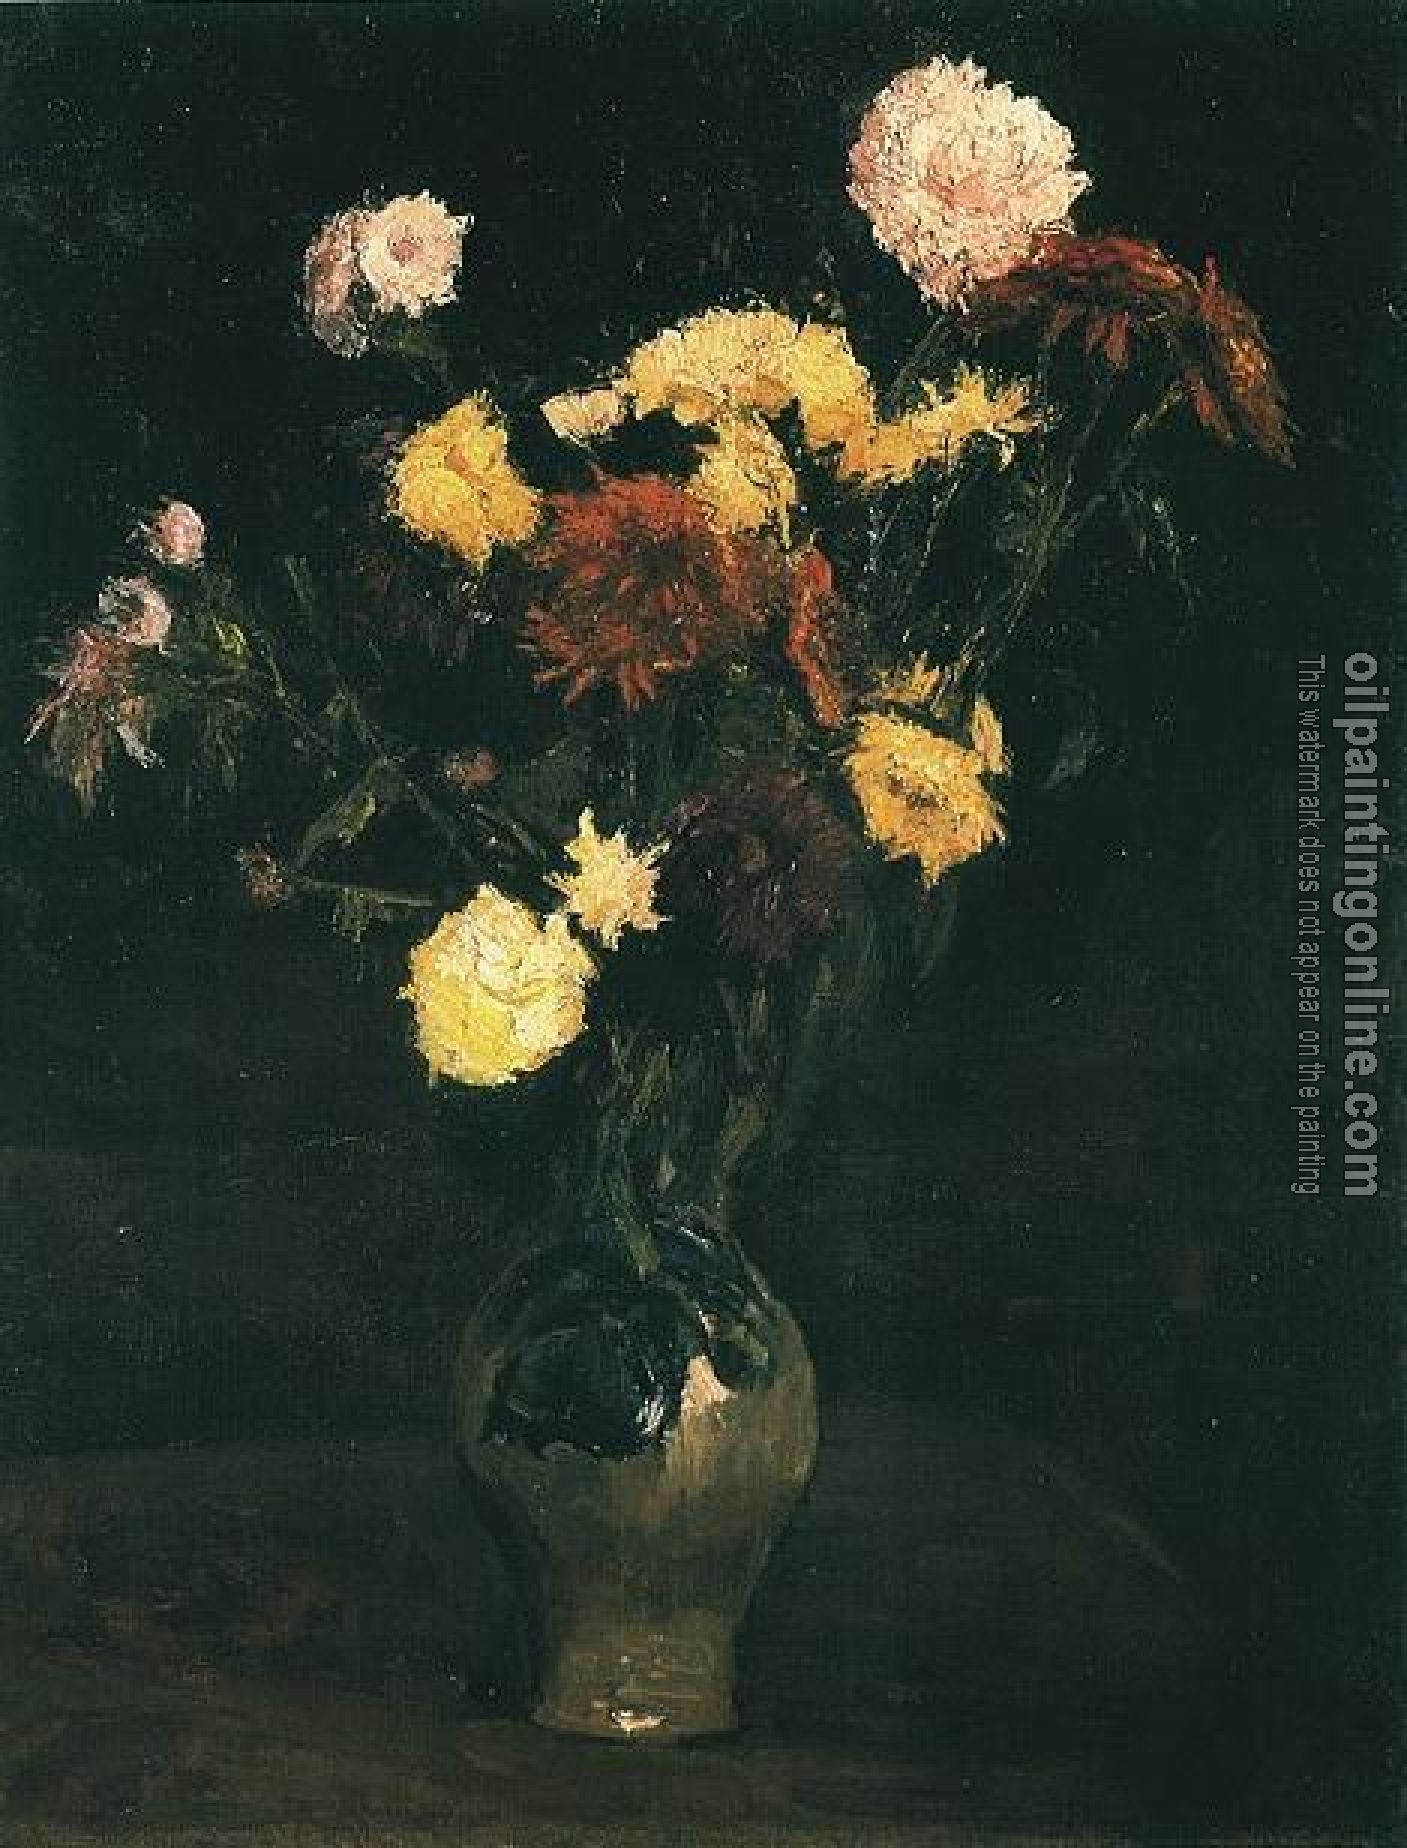 Gogh, Vincent van - Vase with Carnations and Zinnias